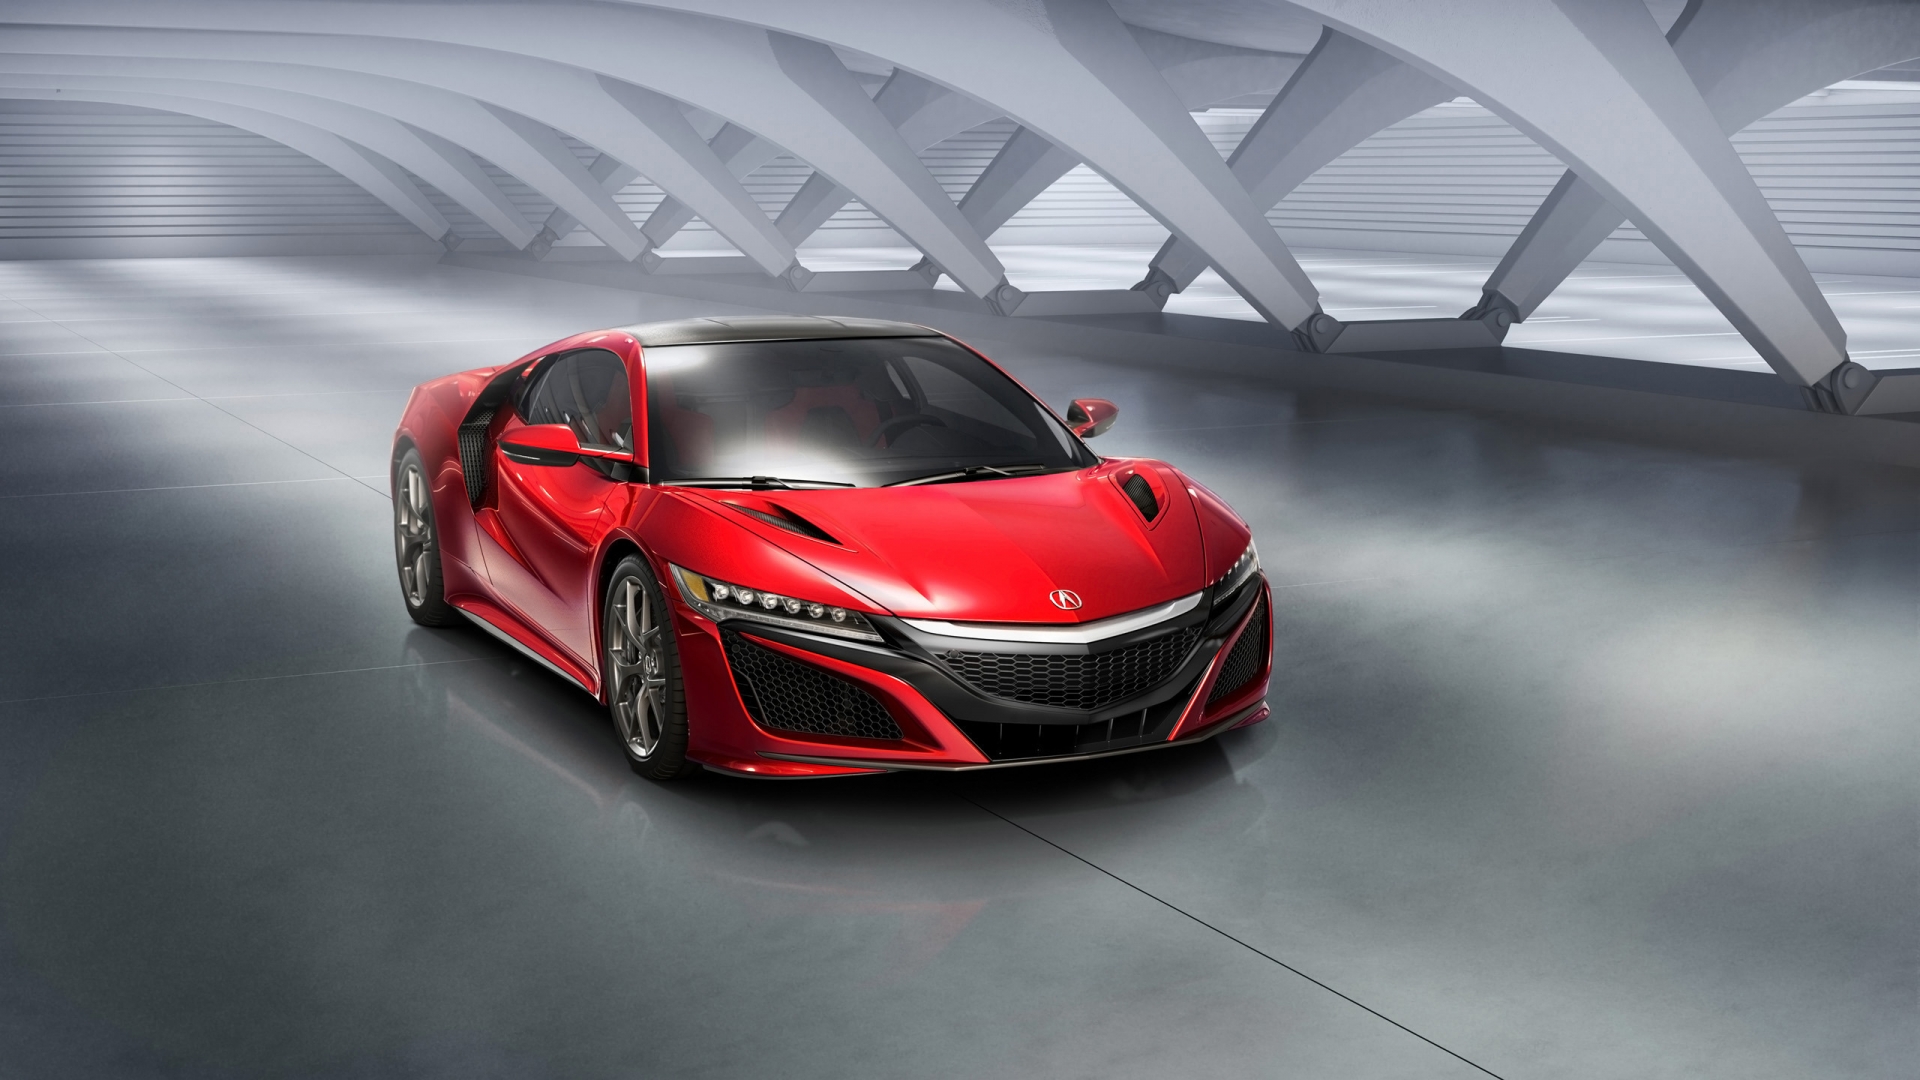 Acura NSX Static for 1920 x 1080 HDTV 1080p resolution